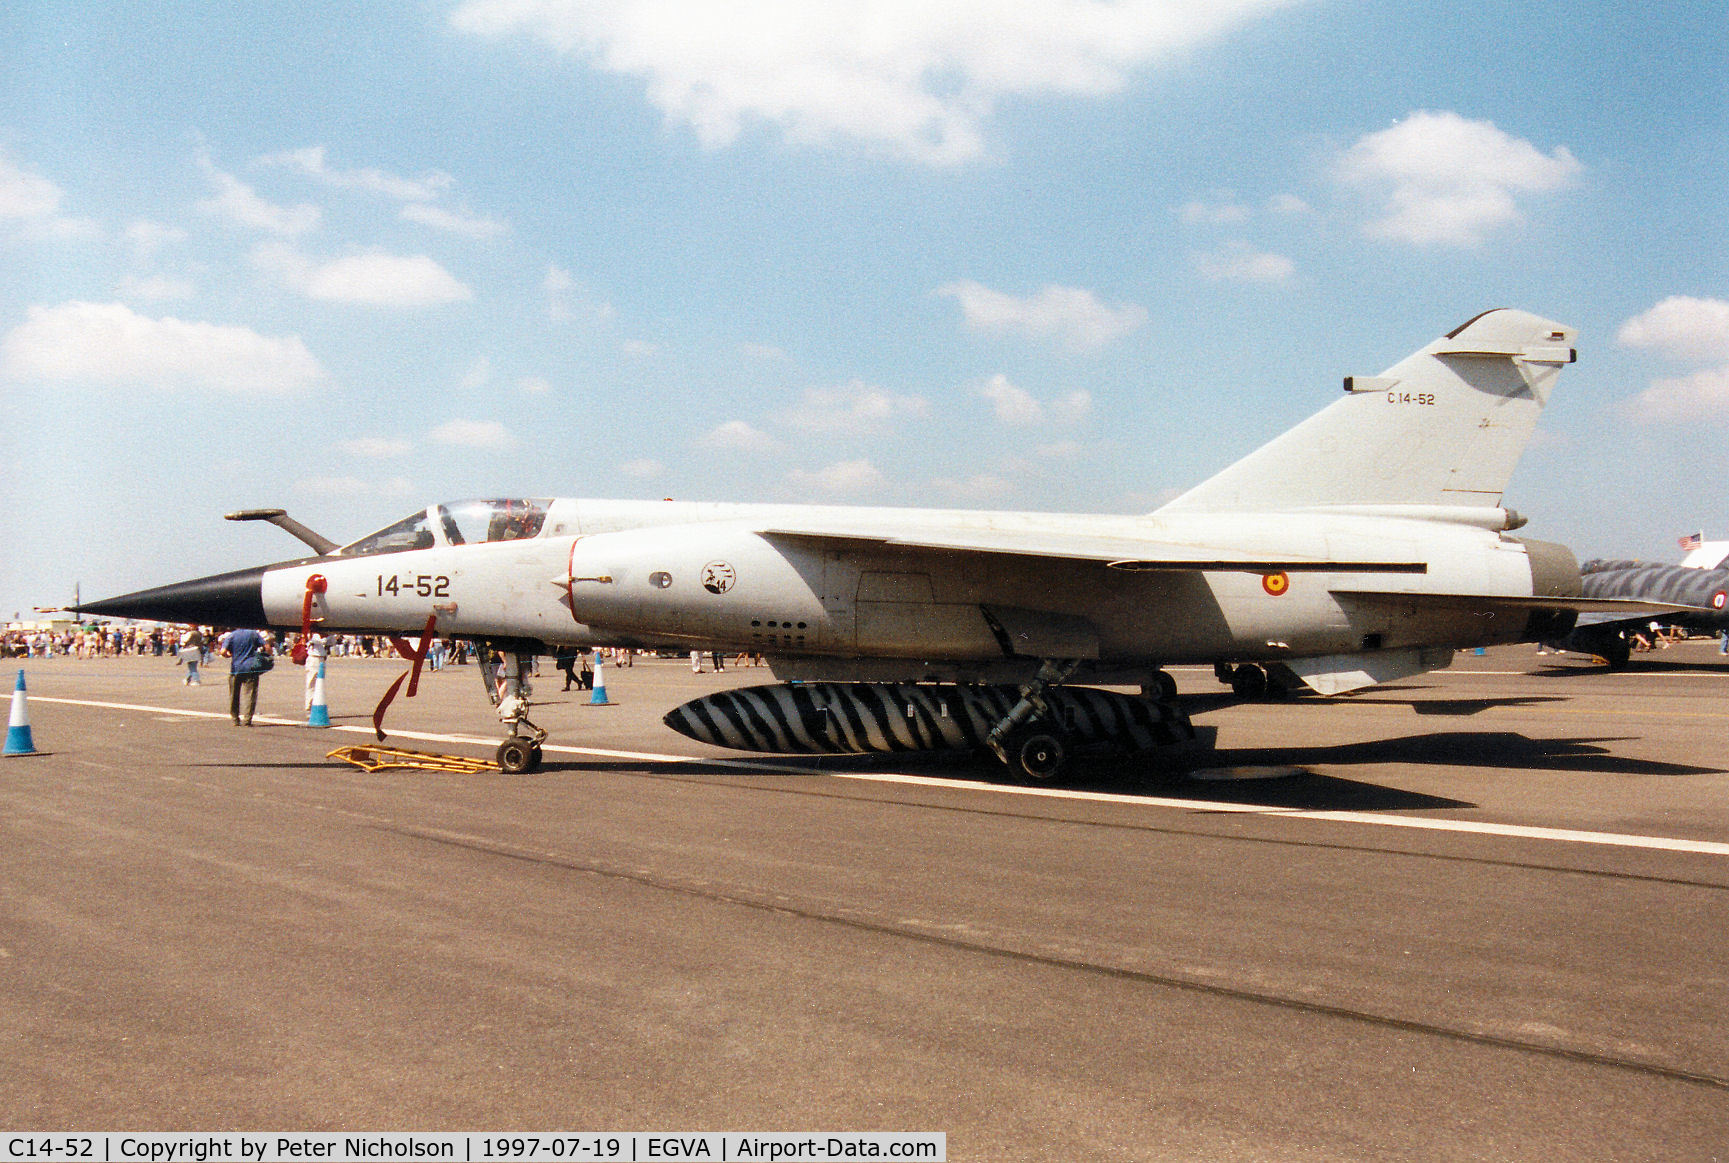 C14-52, Dassault Mirage F.1EE C/N Not found C14-52, Mirage F.1EE of Ala 14 Spanish Air Force on display at the 1997 Intnl Air Tattoo at RAF Fairford.